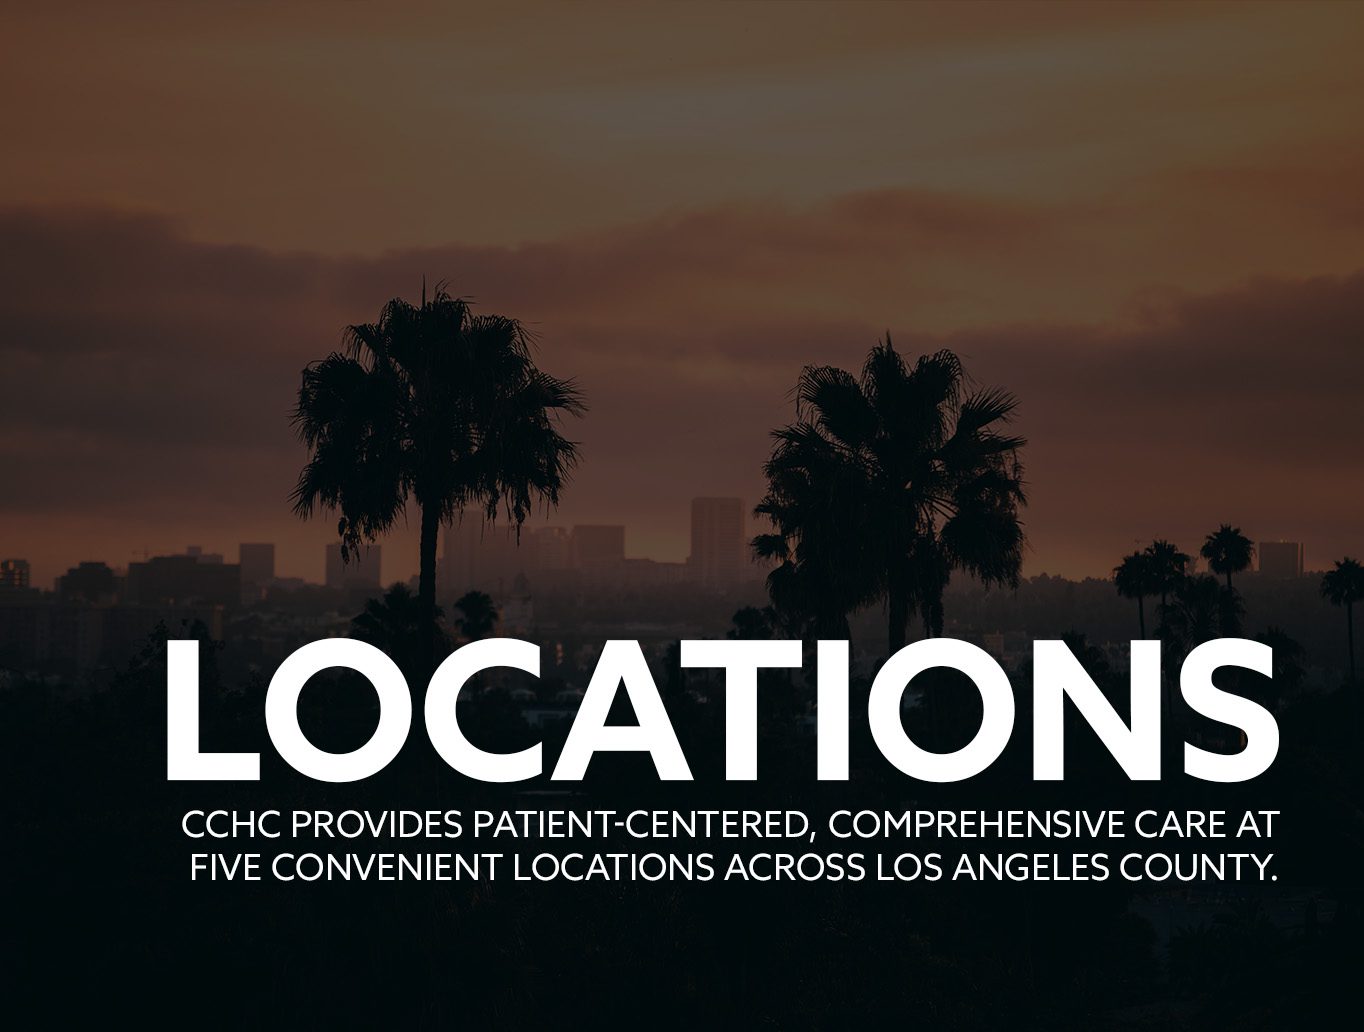 Locations ccc provides patient centered comprehensive care in convenient locations across california.